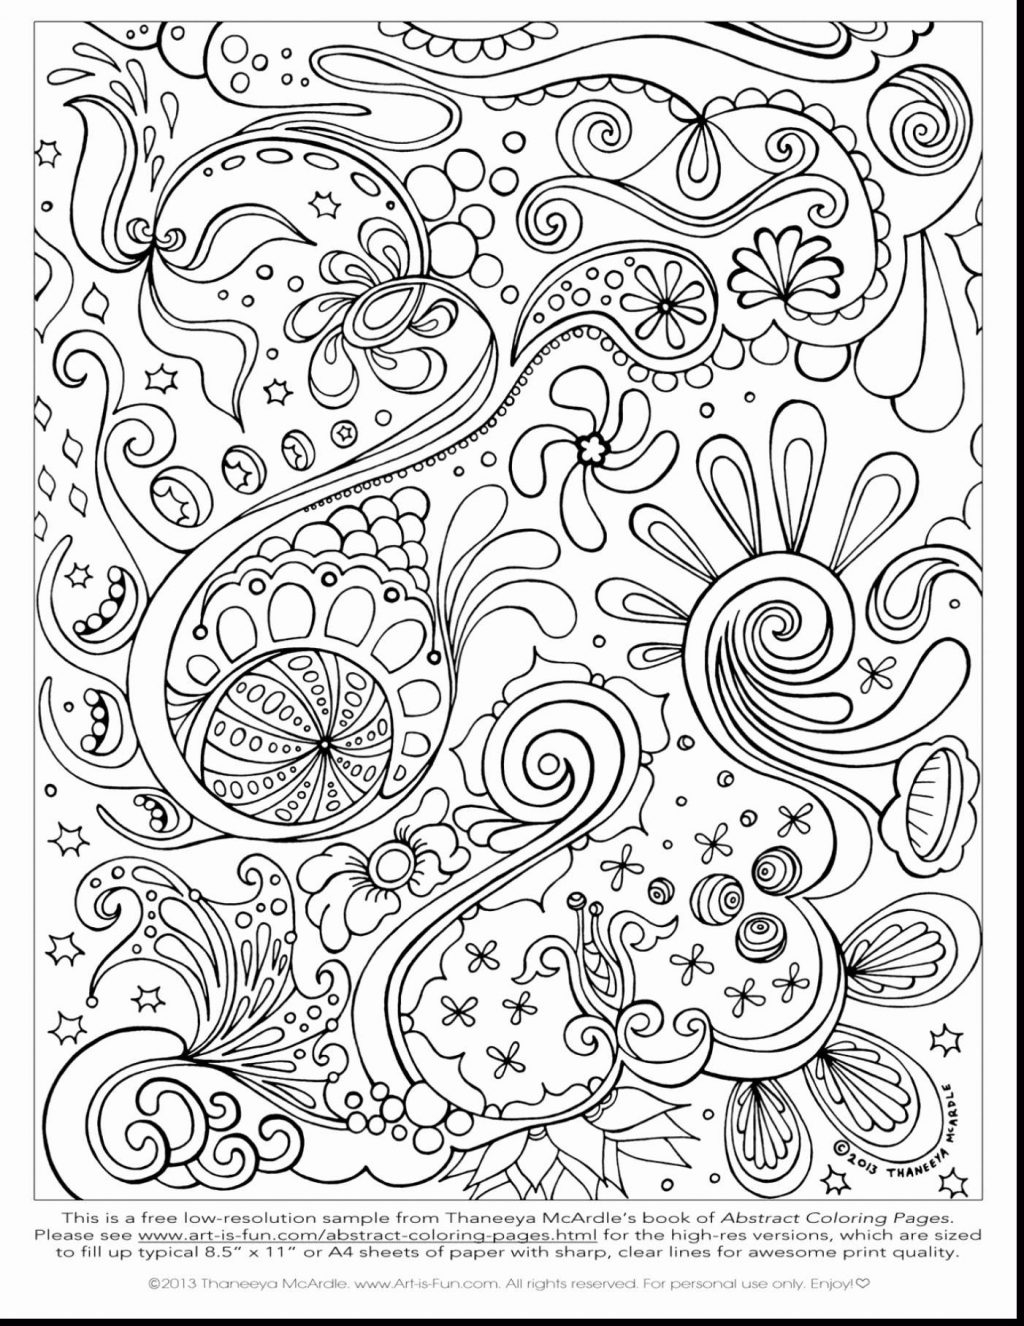 Free Printable Mandala Coloring Pages Adults Coloring Pages Printable Mandala Coloring Pages For Adults